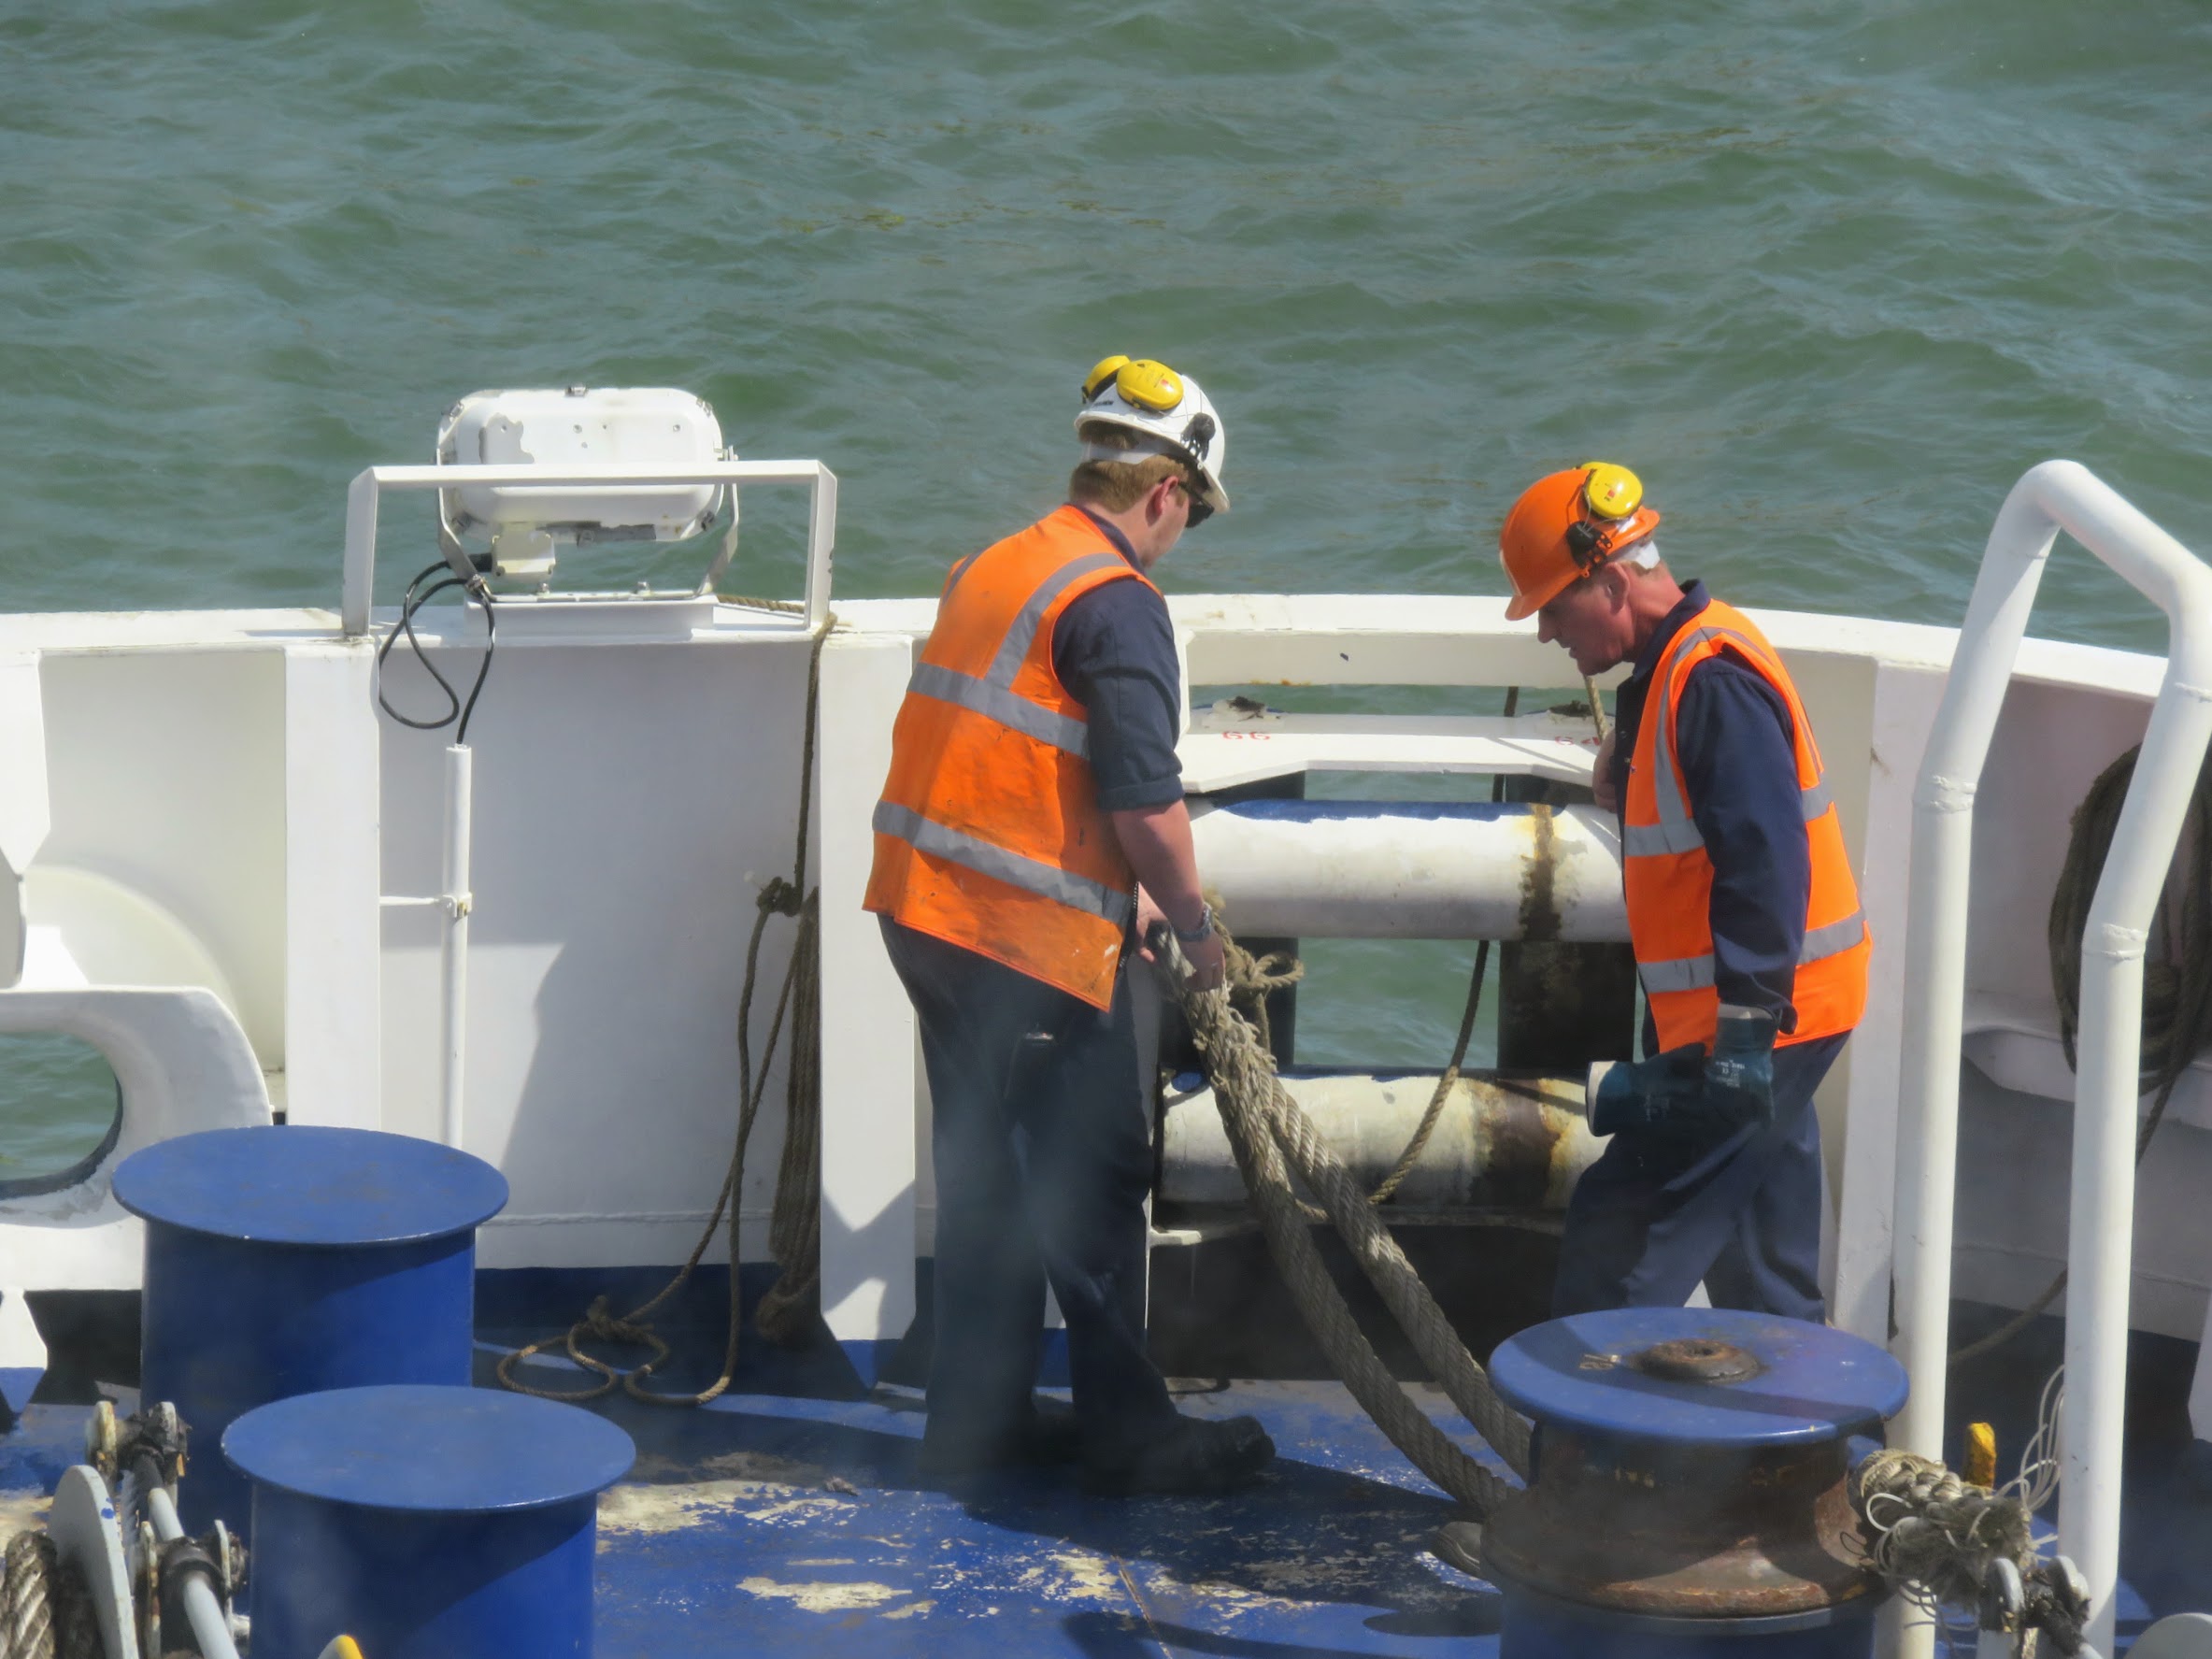   The Society of Consulting Marine Engineers and Ship Surveyors    Your Partner for Technical Marine Services    Find out more  